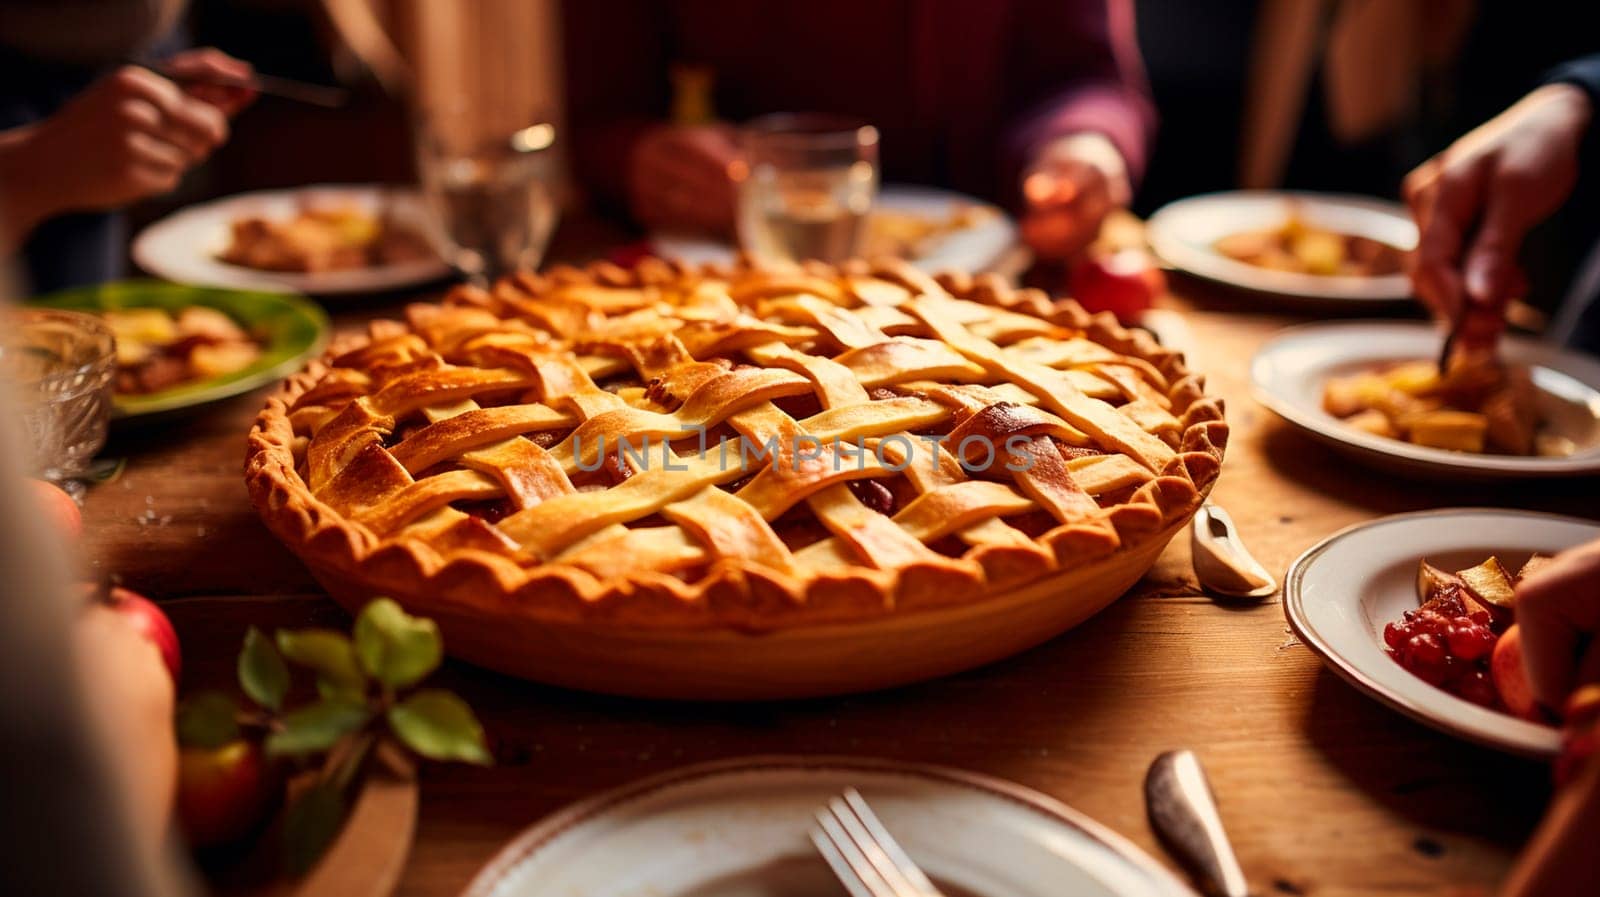 apple pie on the table against the backdrop of a family dinner. Selective focus. food.